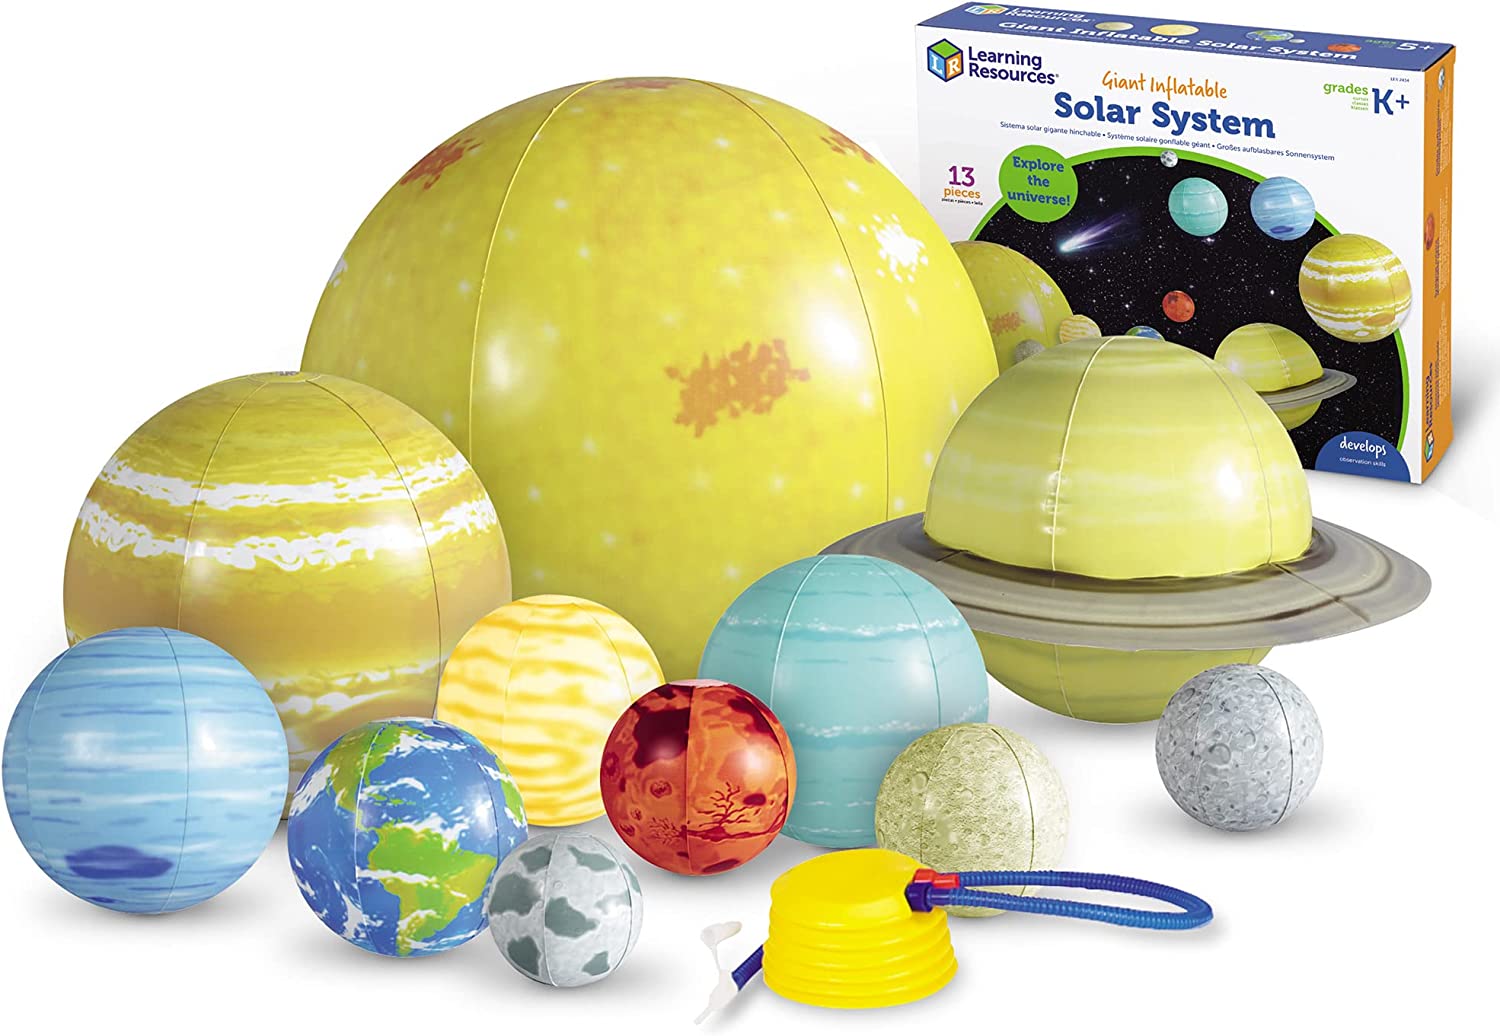 13-Piece Learning Resources Giant Inflatable Solar System Science Kit $33 + Free Shipping